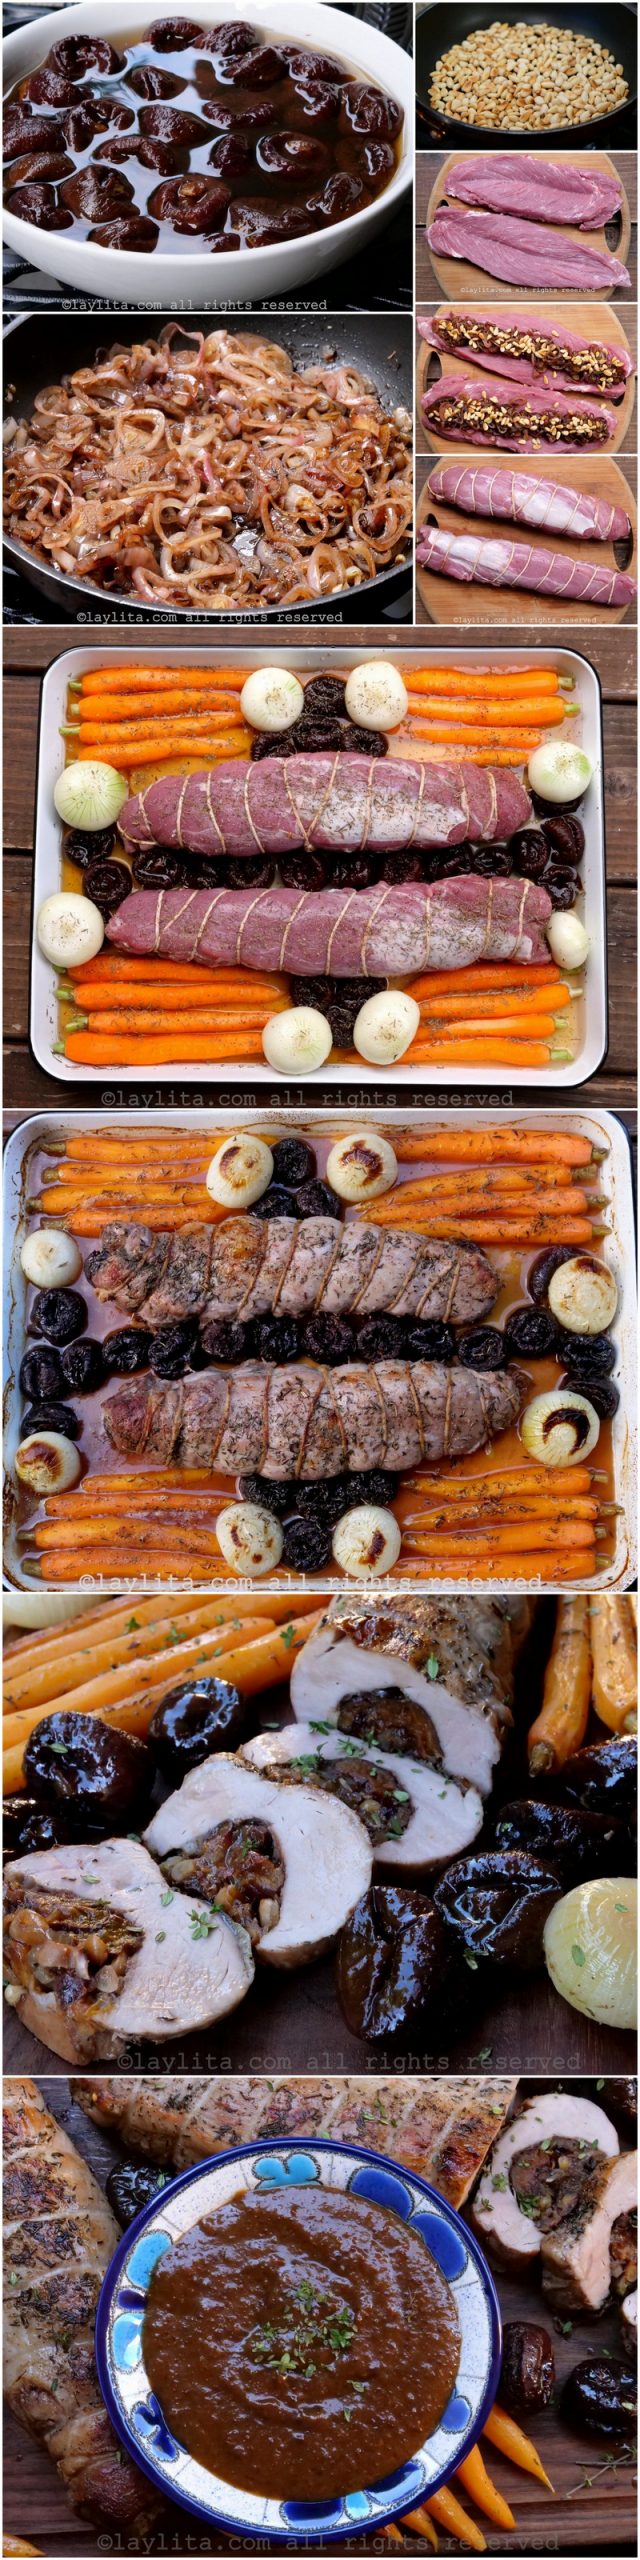 Step by step preparation photos for pork tenderloin with prunes and white wine